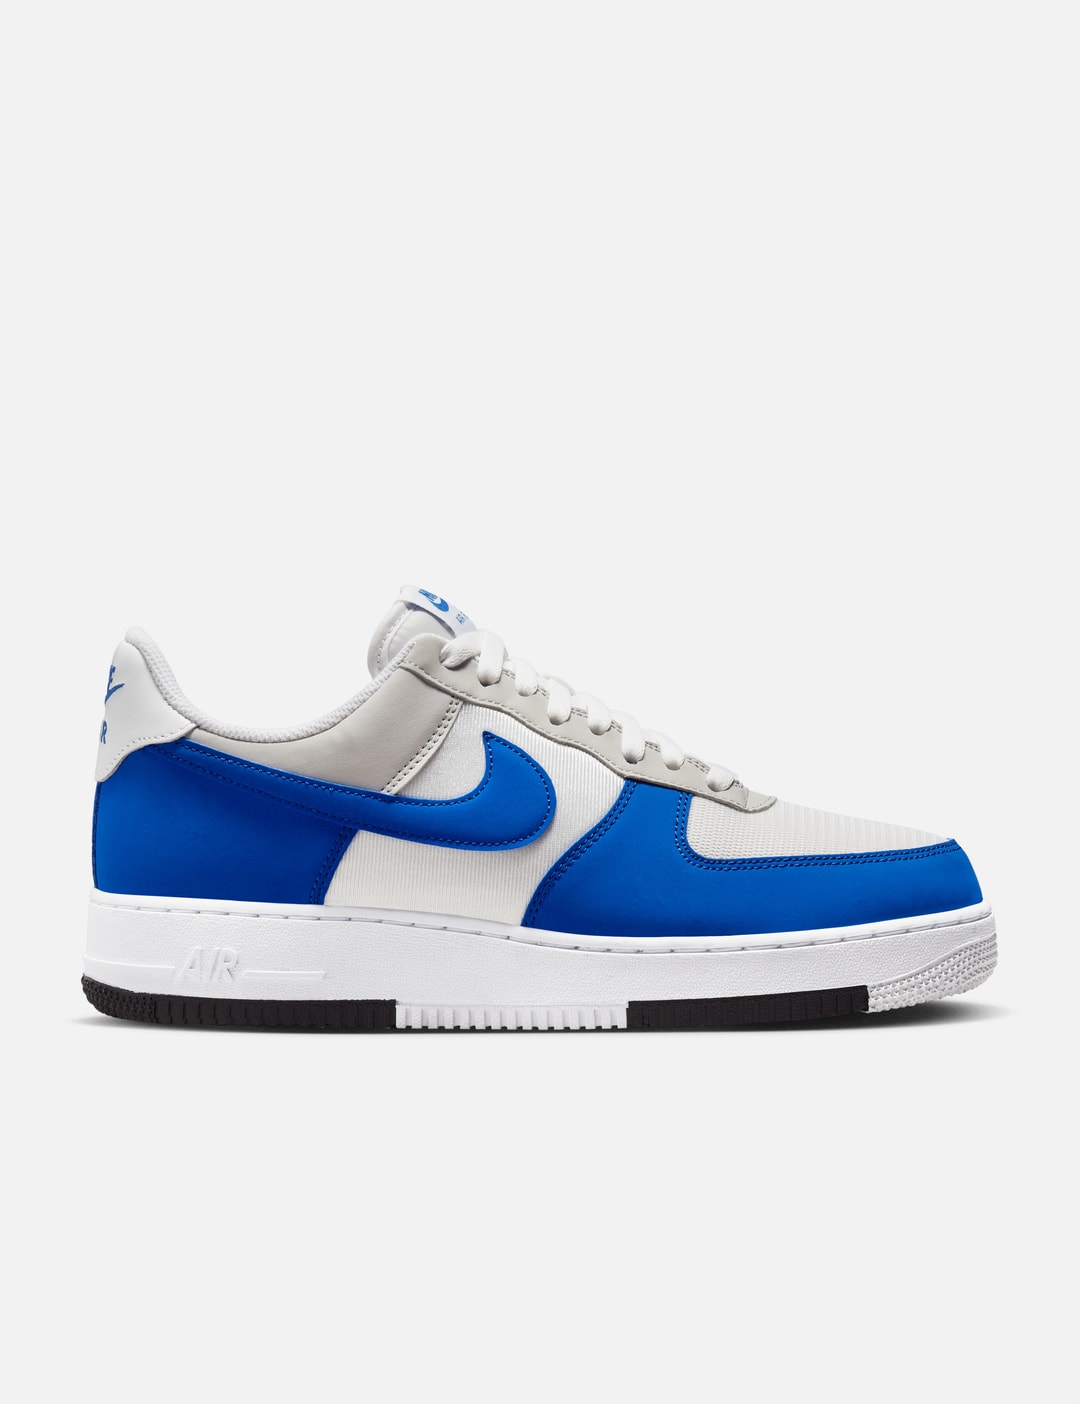 Instituto en lugar Anécdota Nike - NIKE AIR FORCE 1 '07 | HBX - Globally Curated Fashion and Lifestyle  by Hypebeast